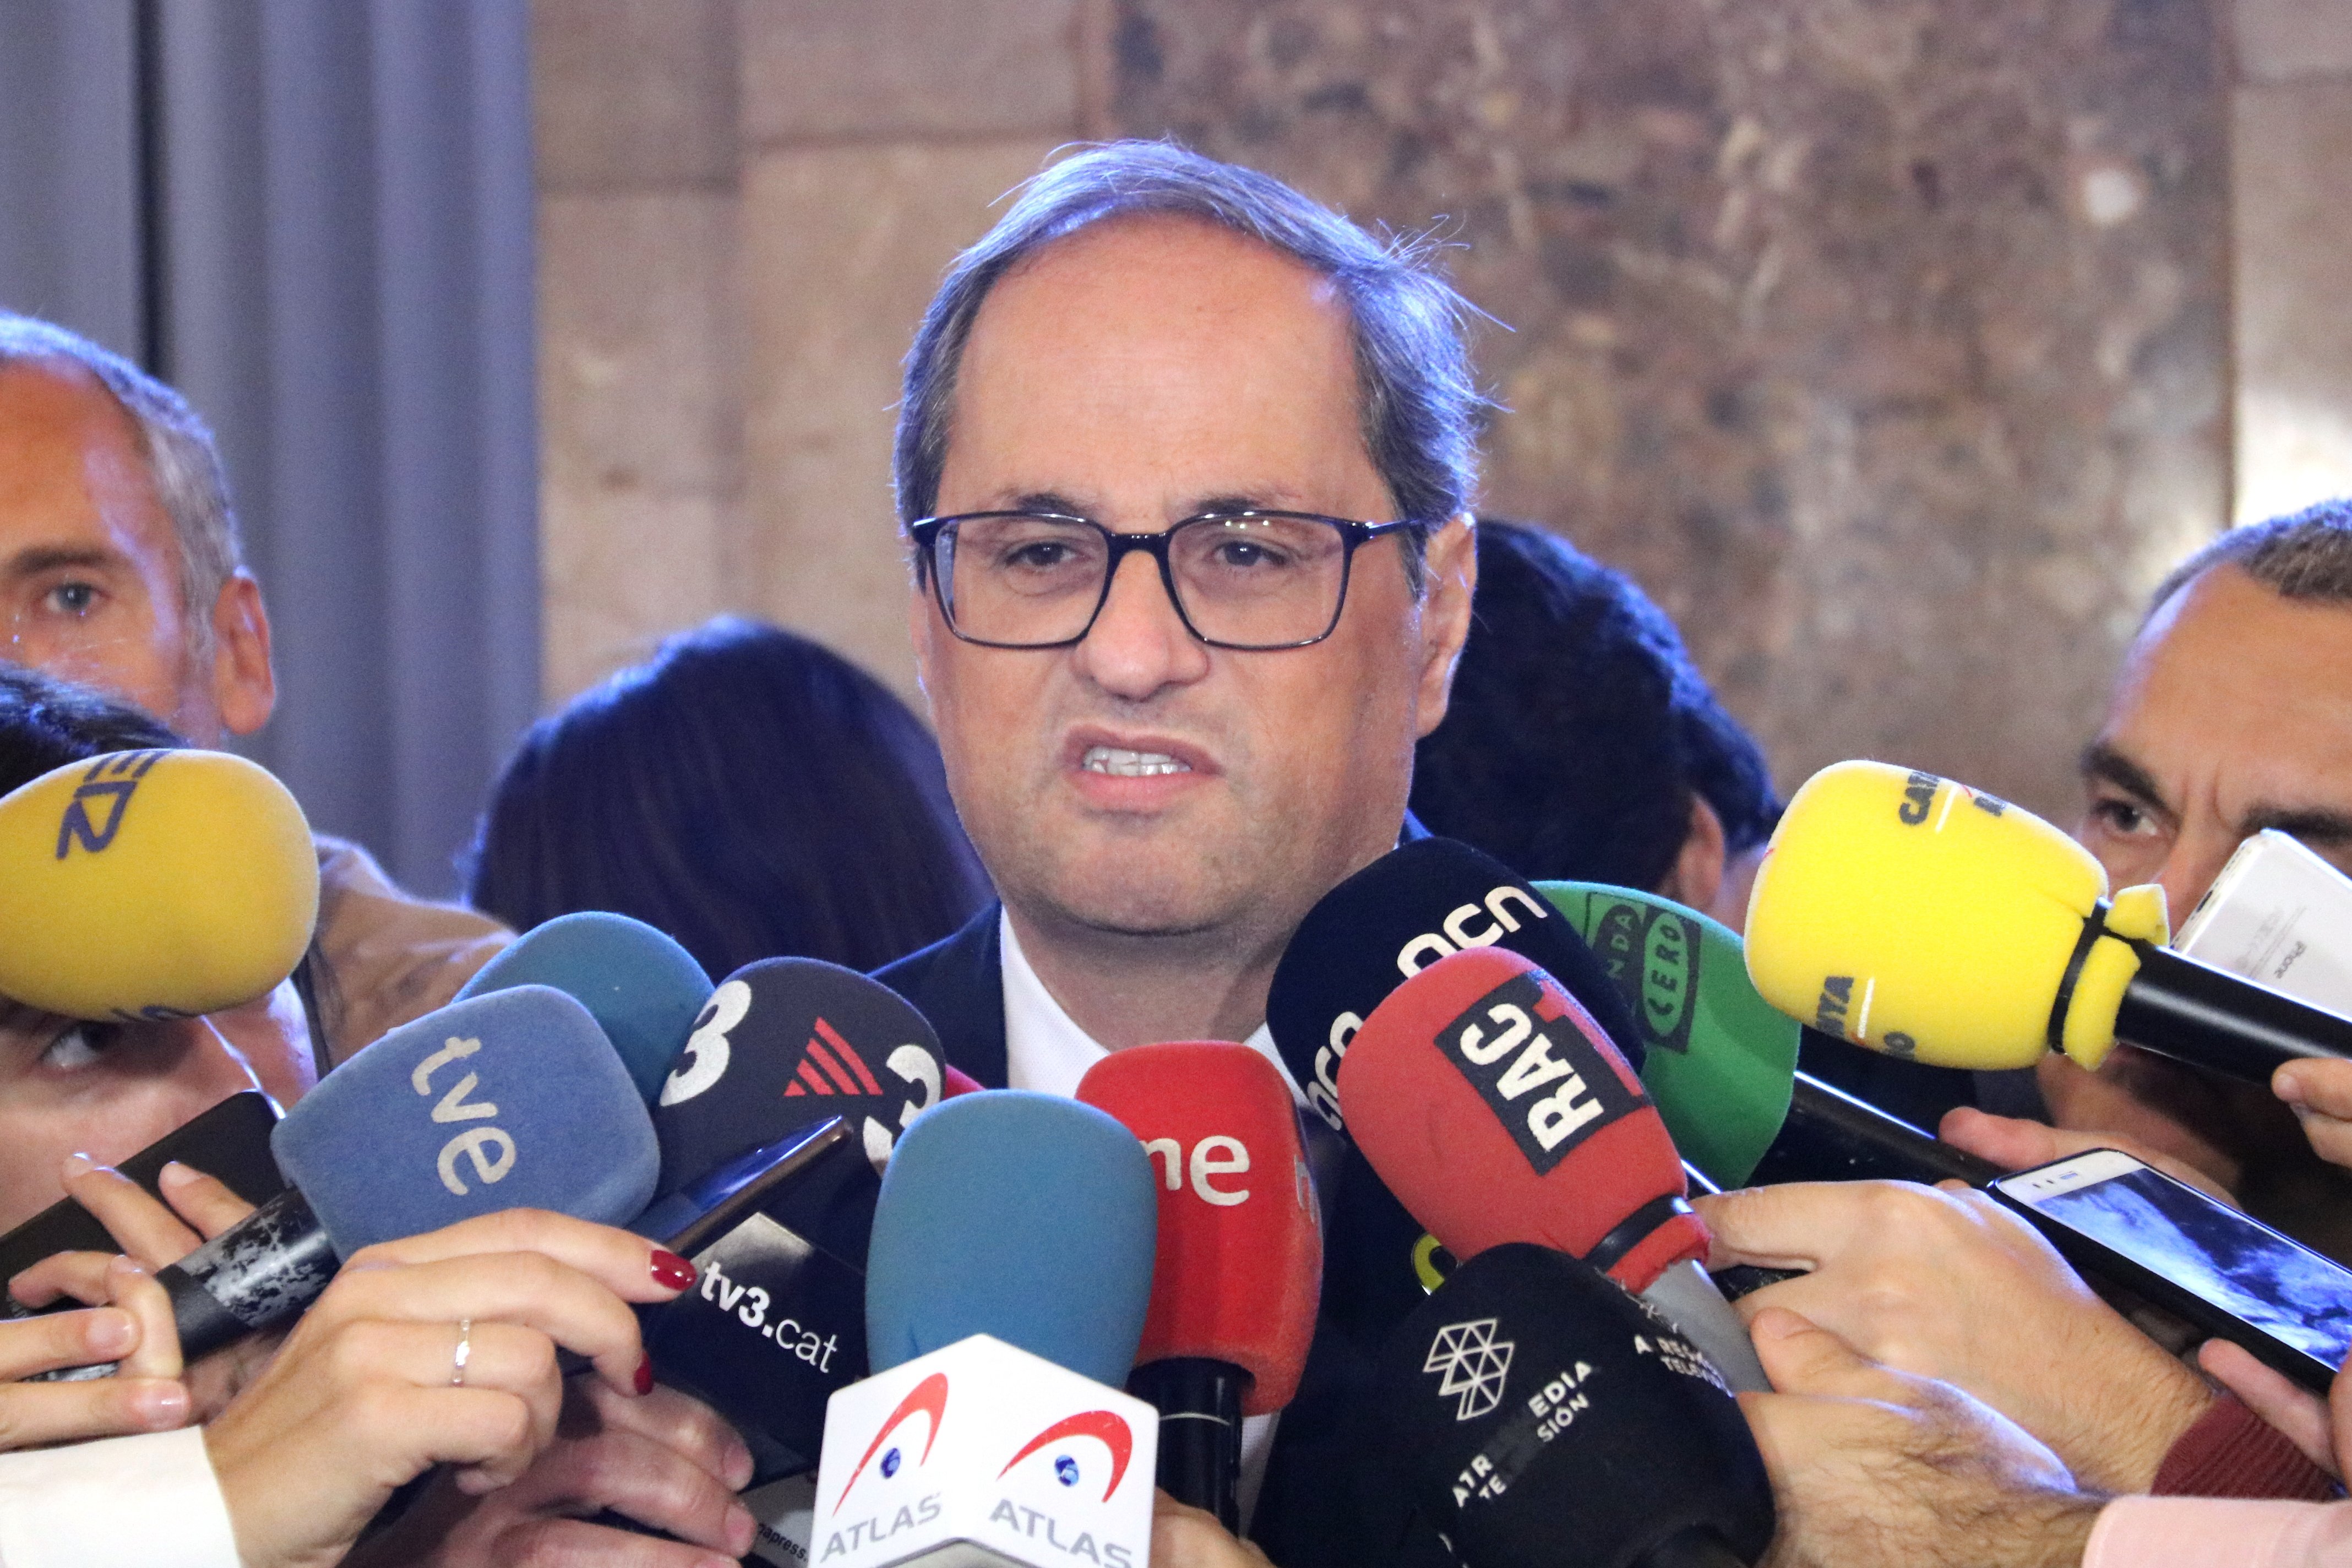 Torra: "Today, the trial starts of the two million Catalans who voted"